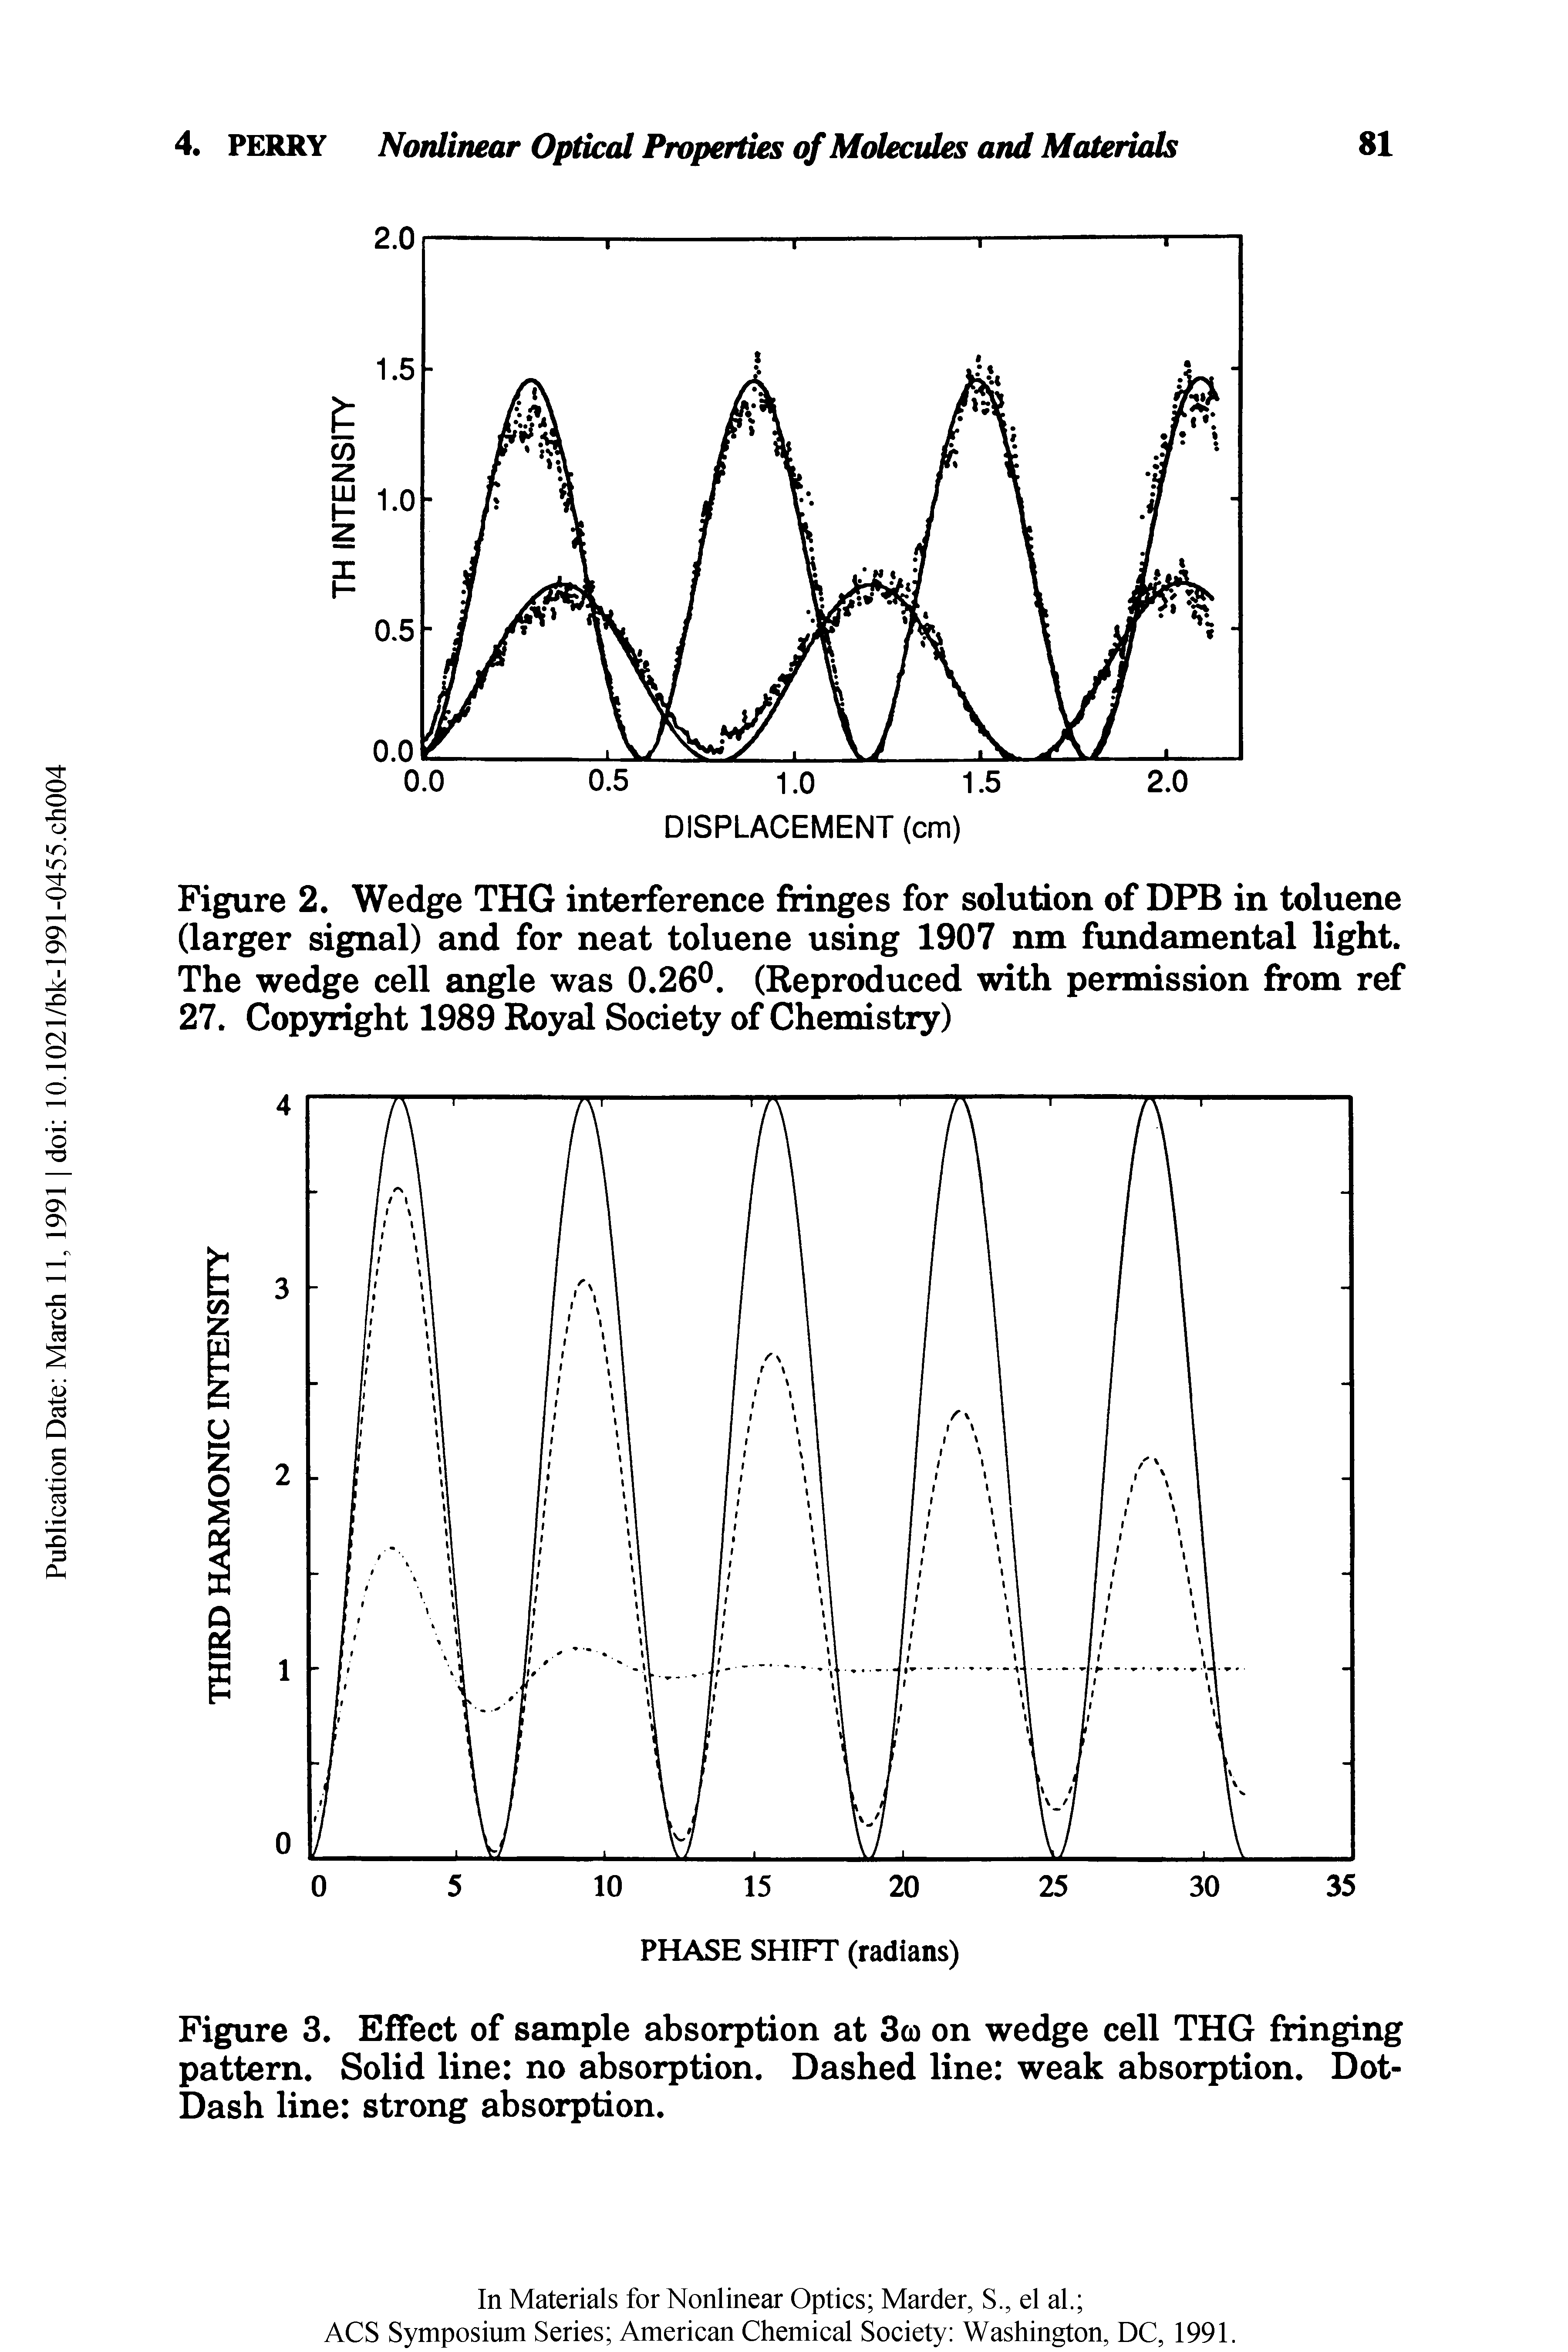 Figure 2. Wedge THG interference fringes for solution of DPB in toluene (larger signal) and for neat toluene using 1907 nm fundamental light. The wedge cell angle was 0.26°. (Reproduced with permission from ref 27. Copyright 1989 Royal Society of Chemistry)...